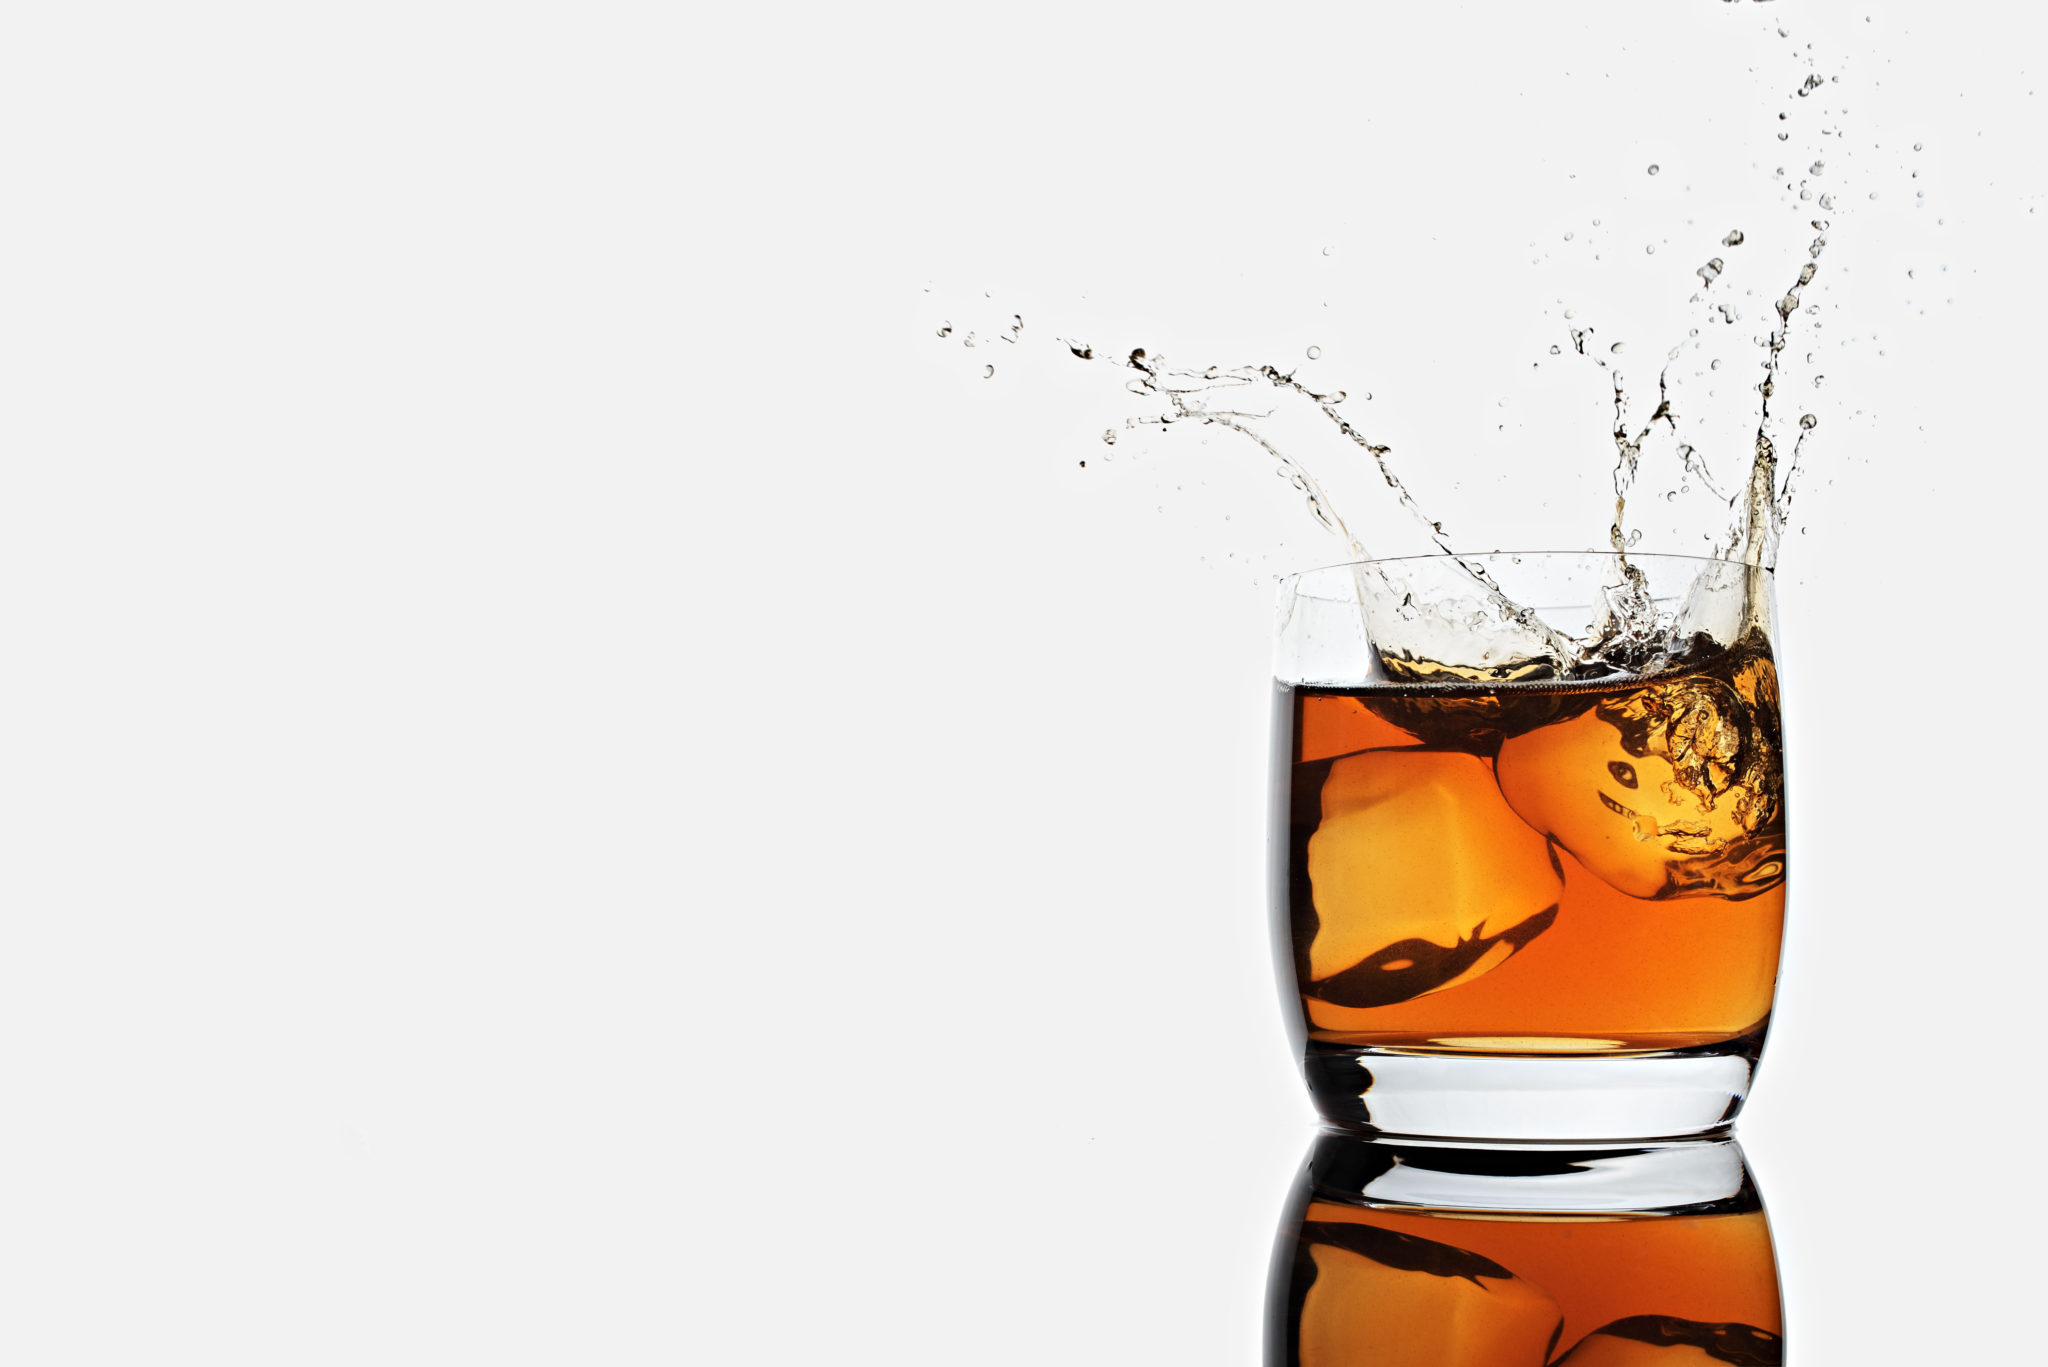 ice cubes splash in a glass cup of whisky